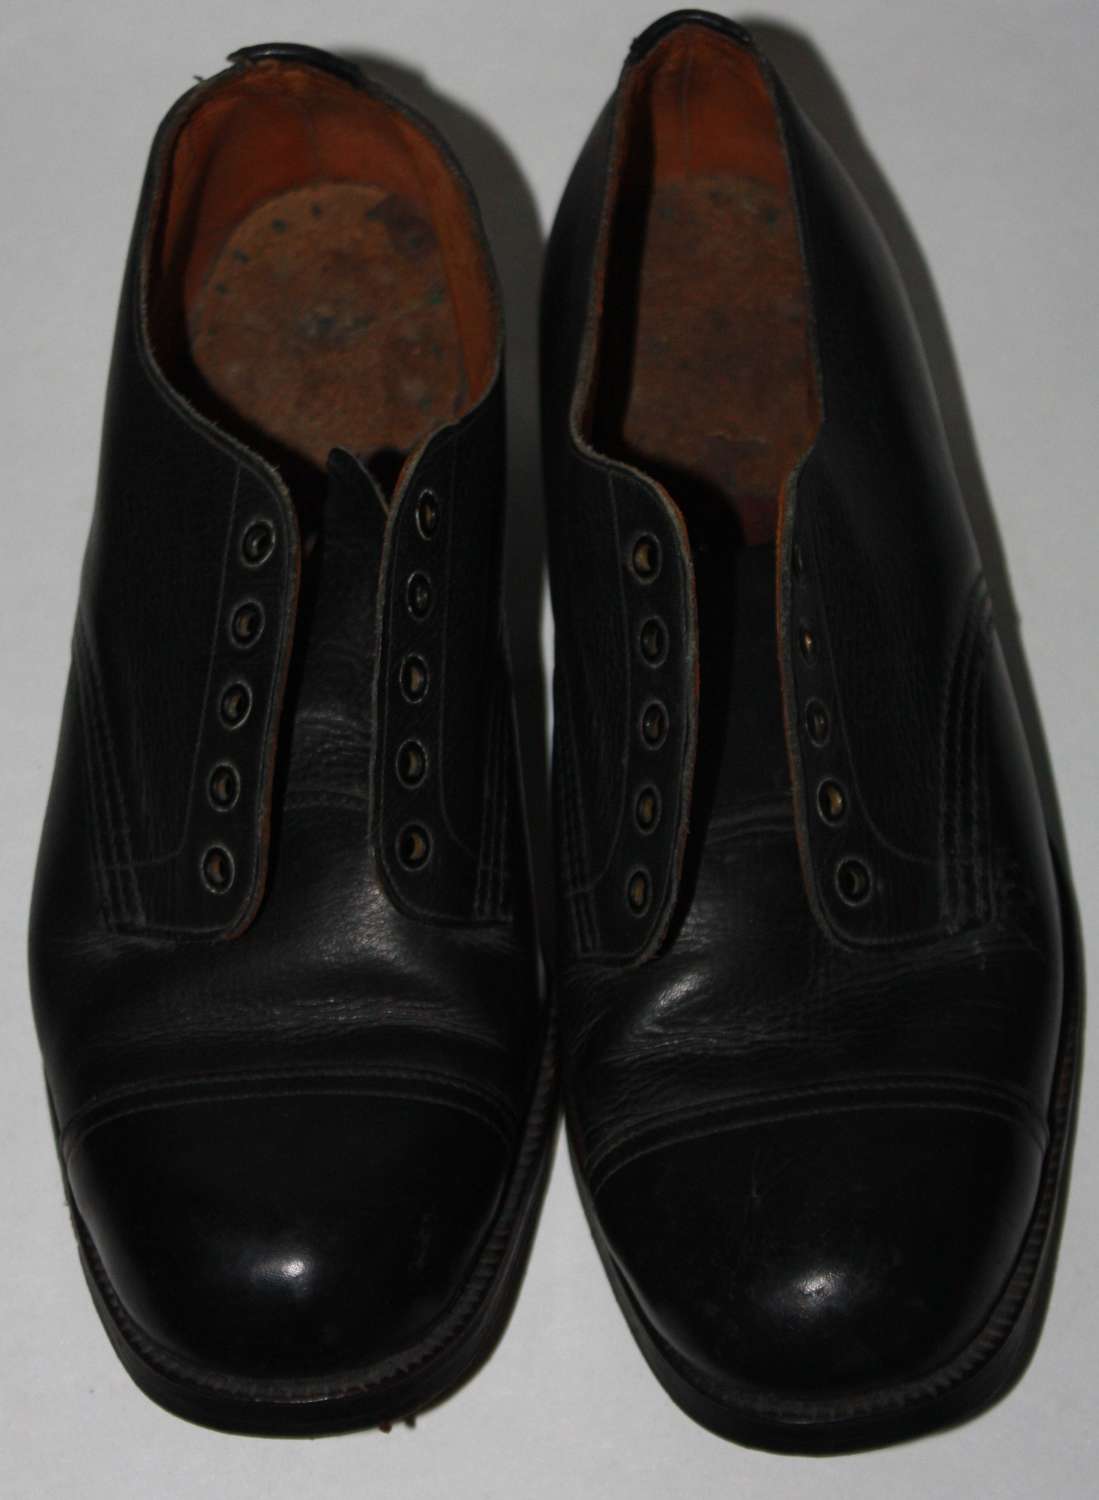 A PAIR OF SIZE 5 CC41 MARKED LADIES BLACK TOE CAPED SHOES